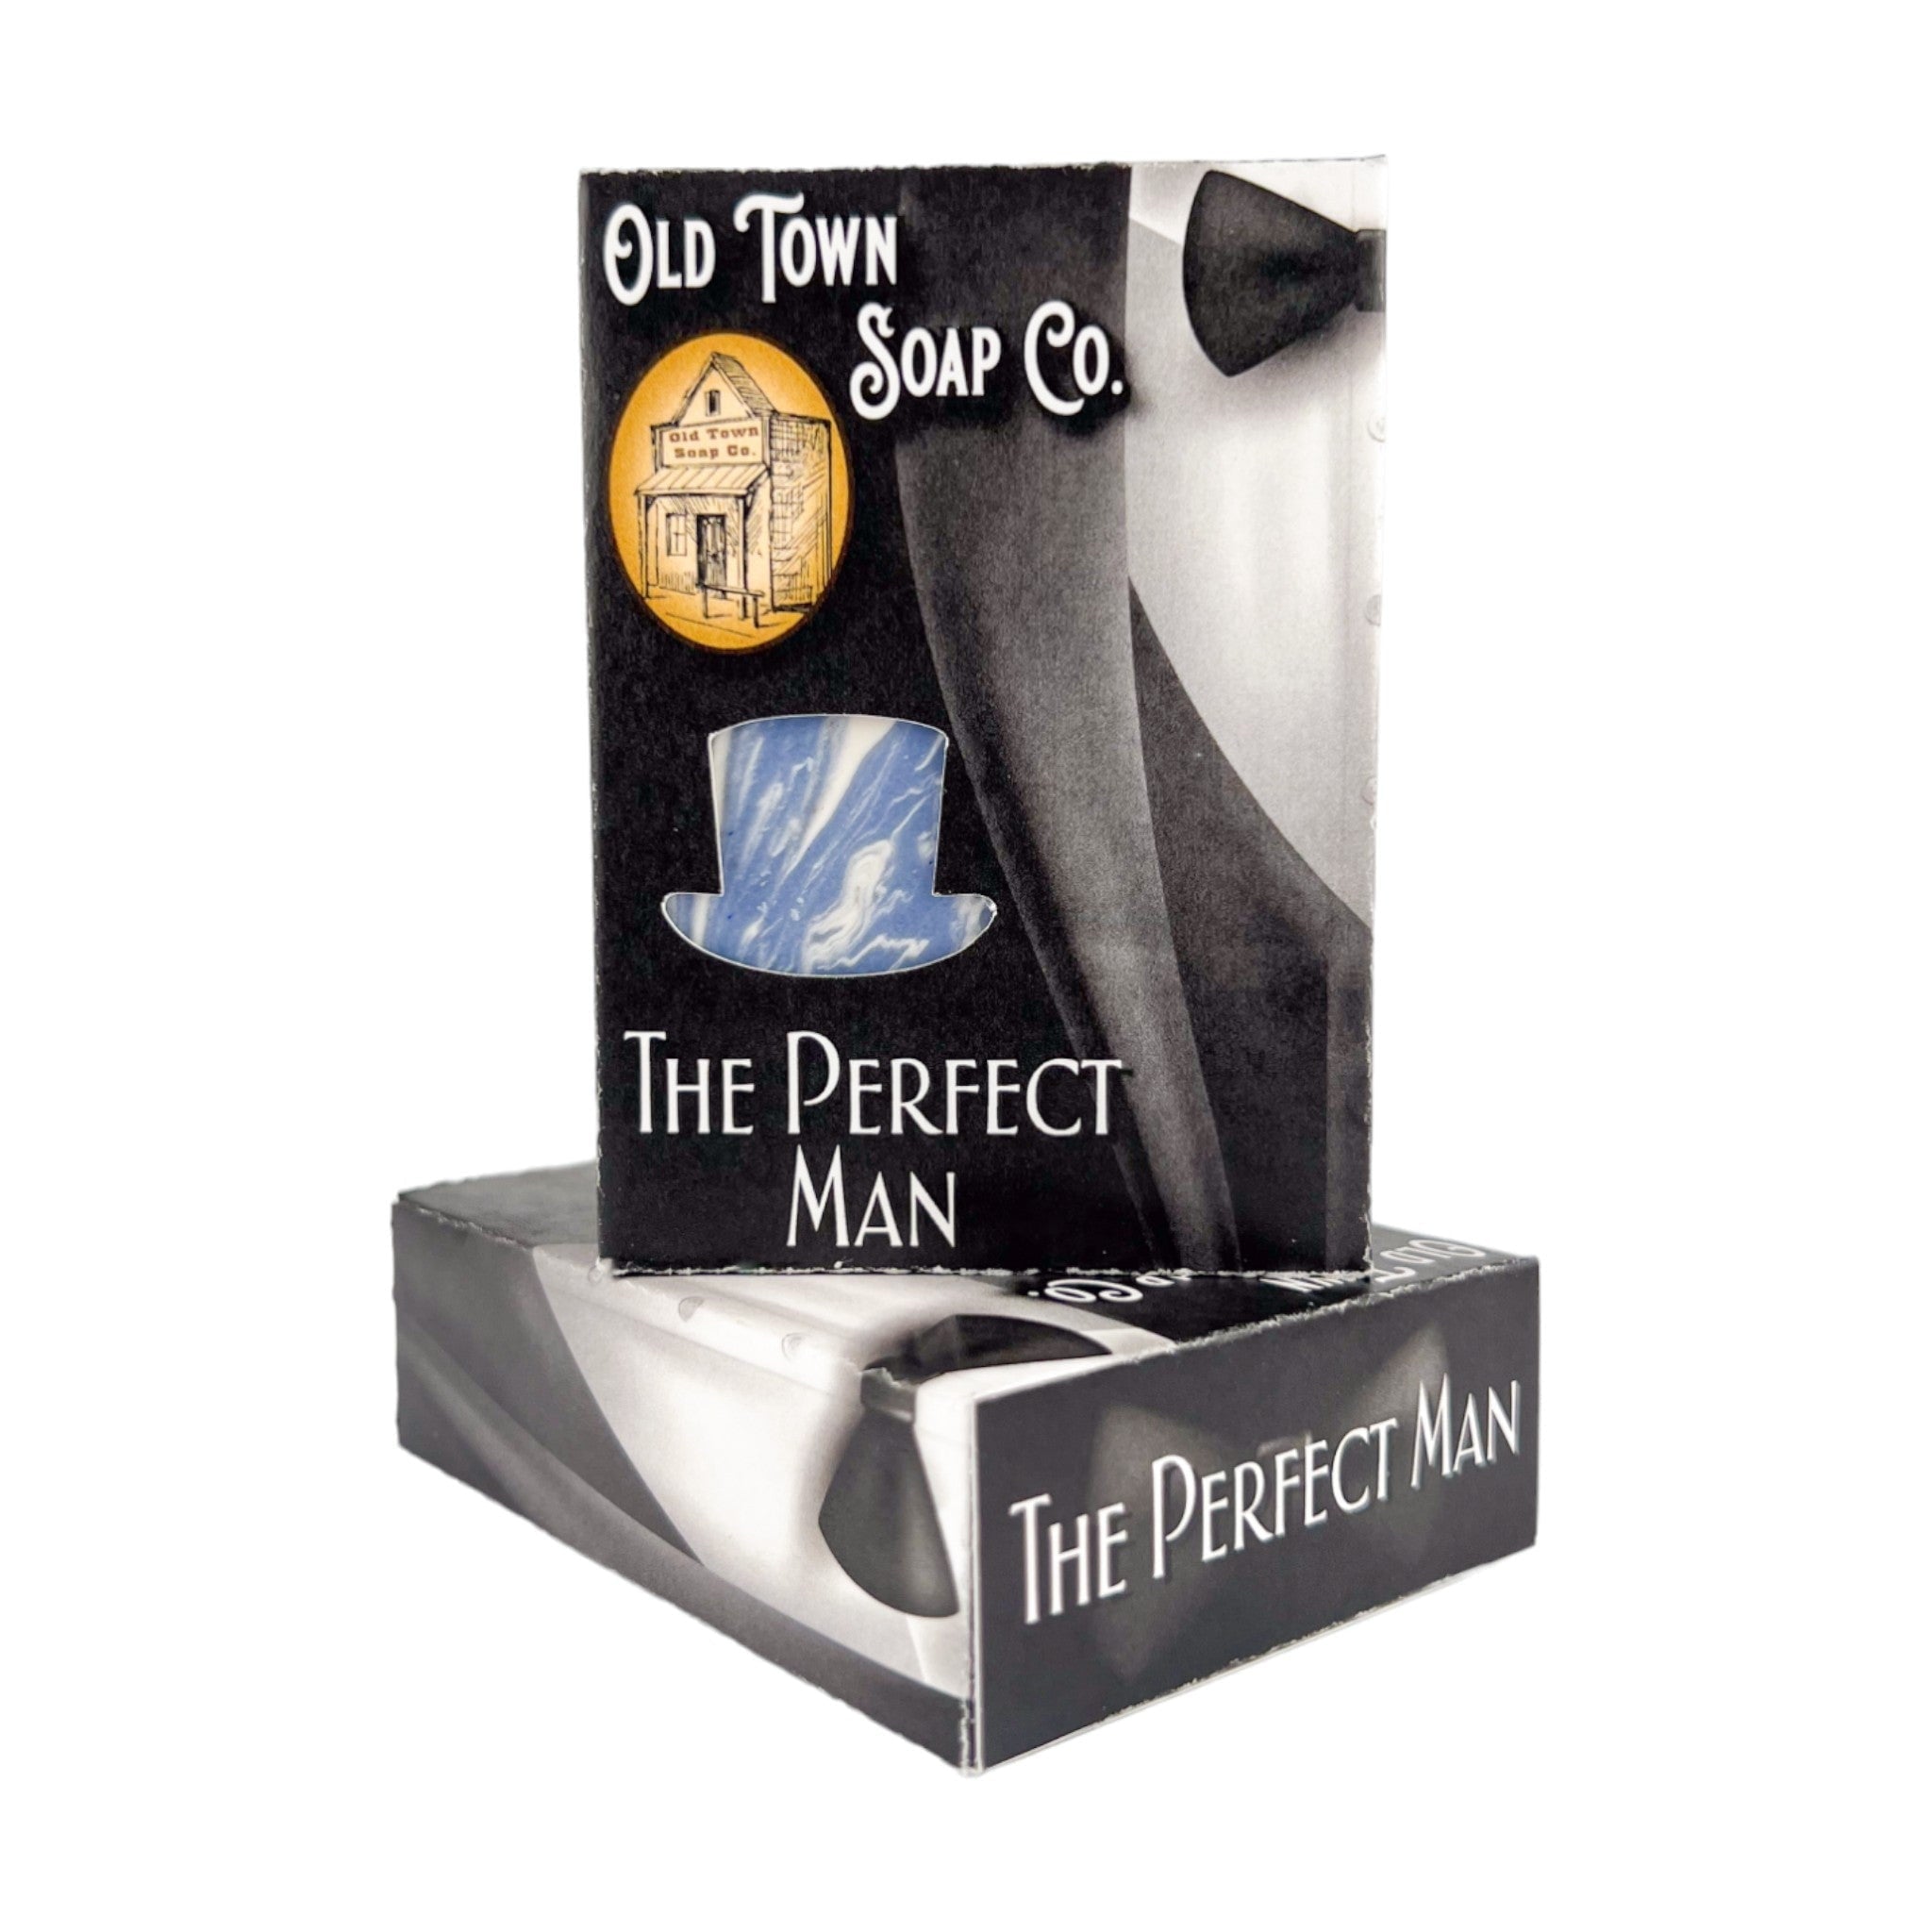 The Perfect Man -Bar Soap - Old Town Soap Co.